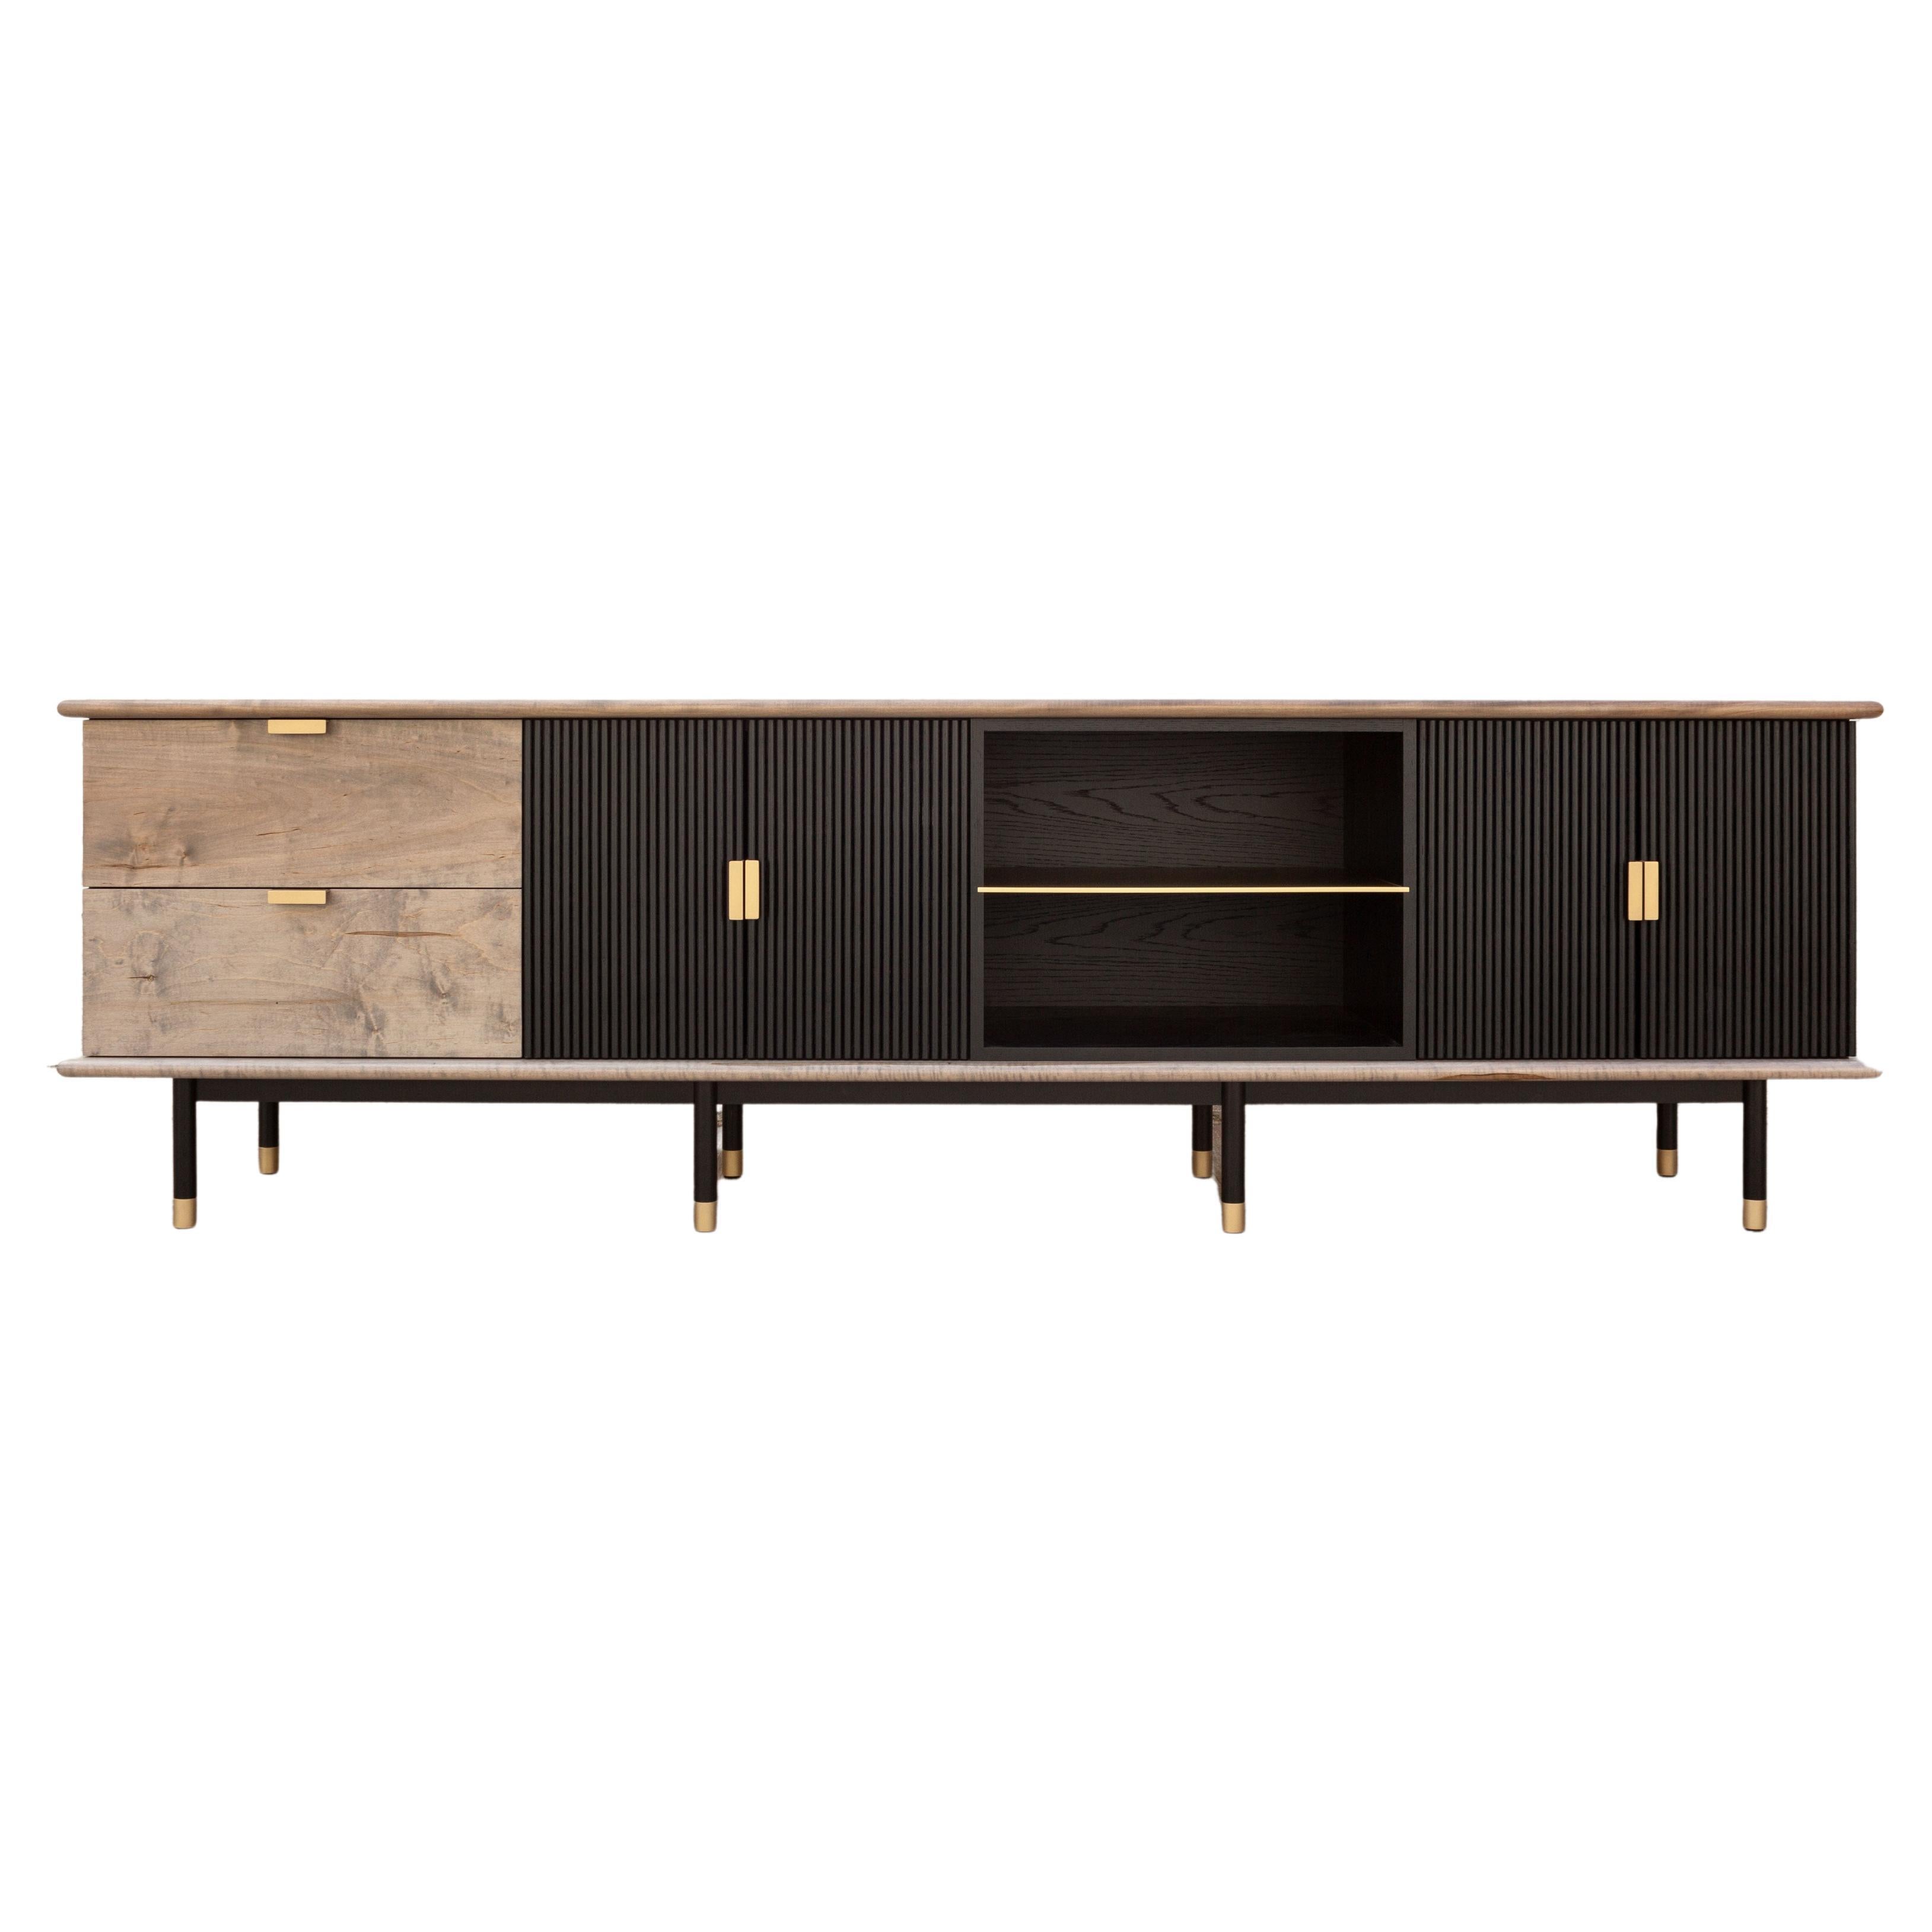 Kenmare Credenza 96", Customizable Wood and Metal